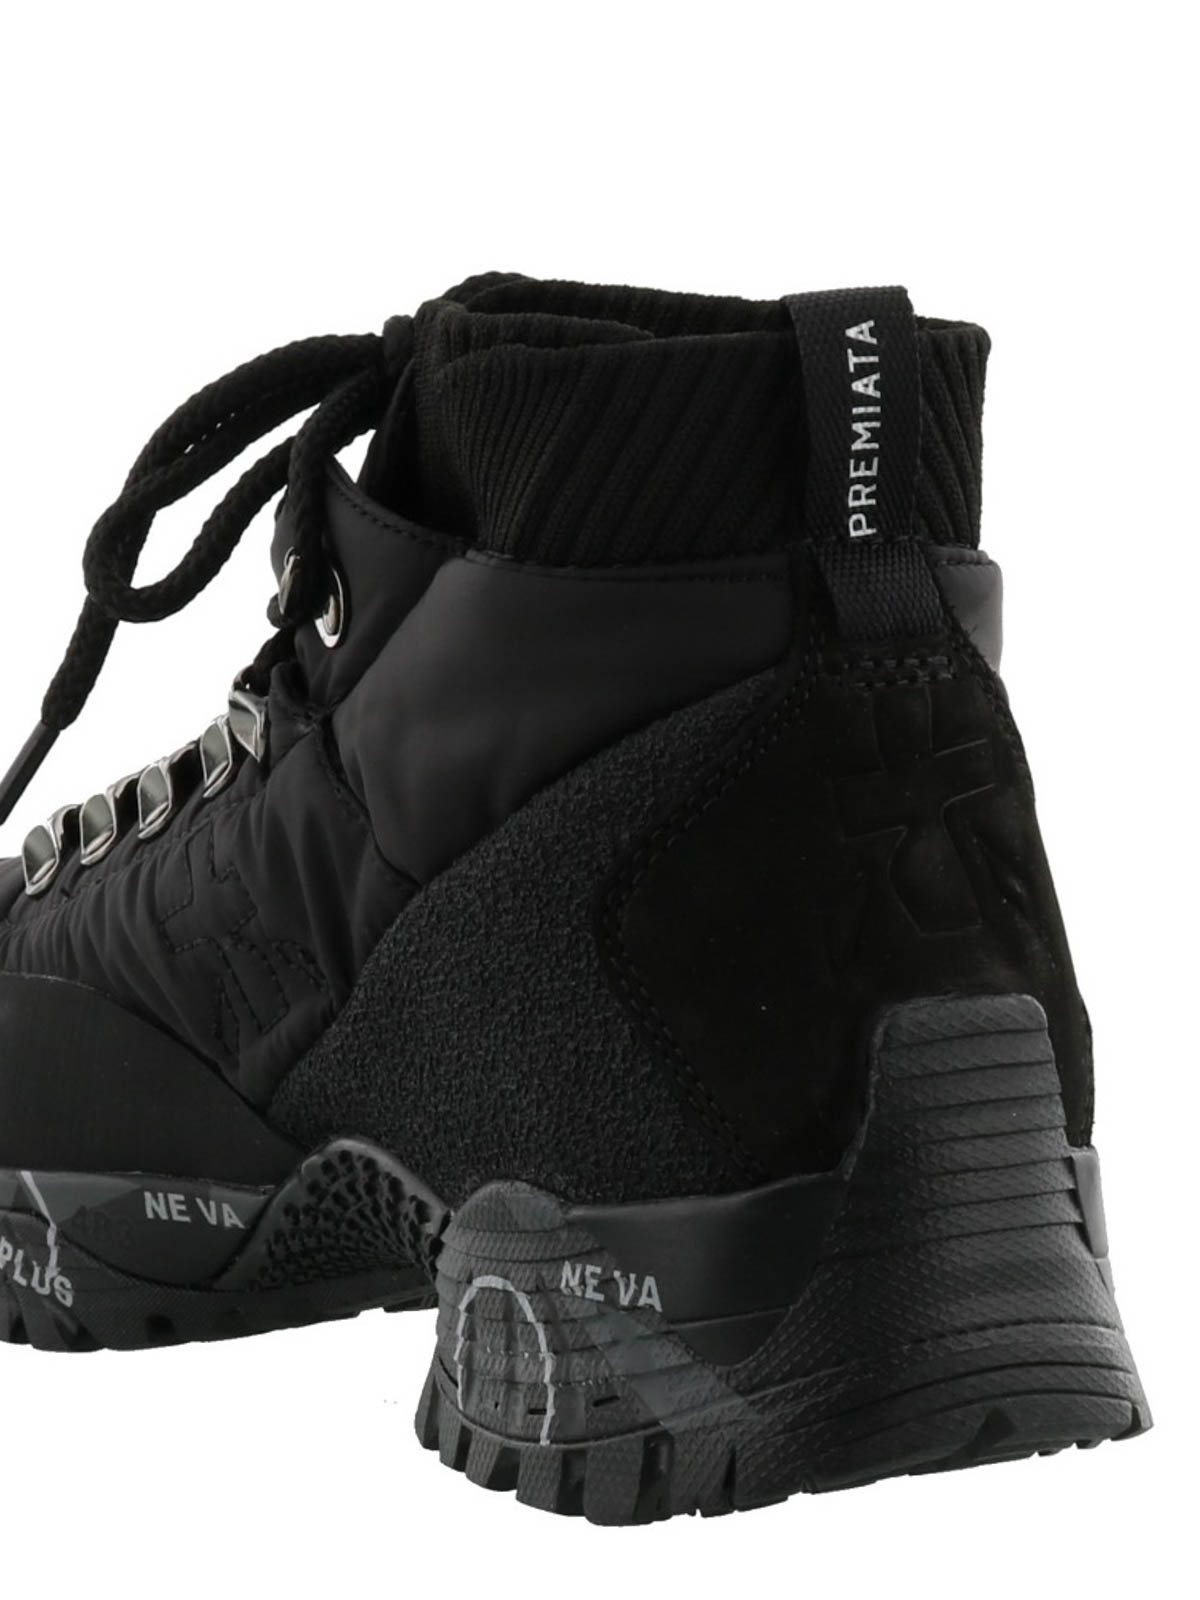 Loutreck 113 trekking style ankle boots 